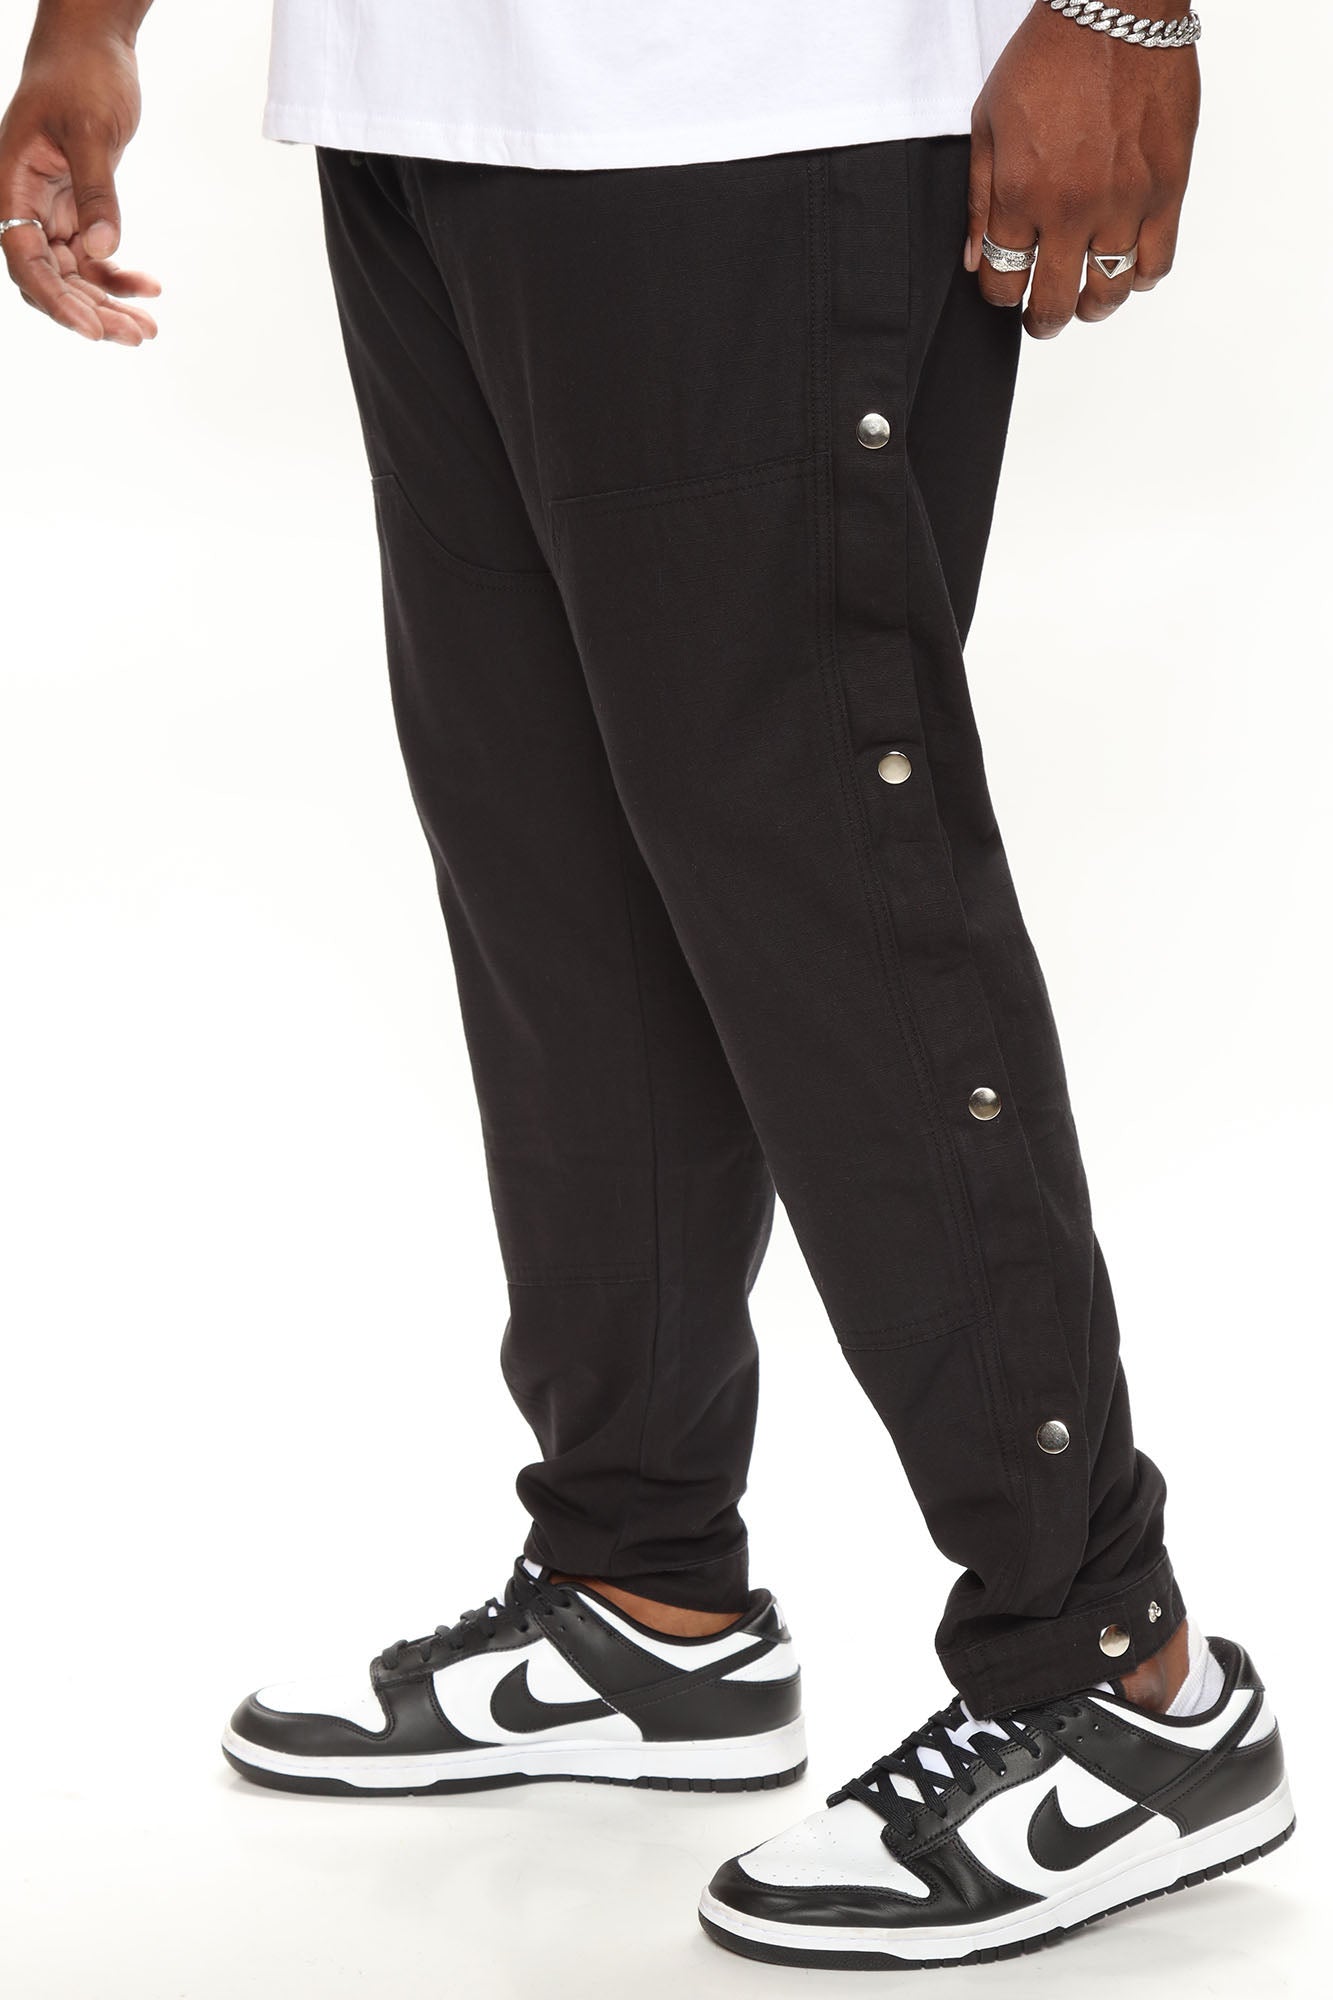 Easy Side Snap Button Pants - Black